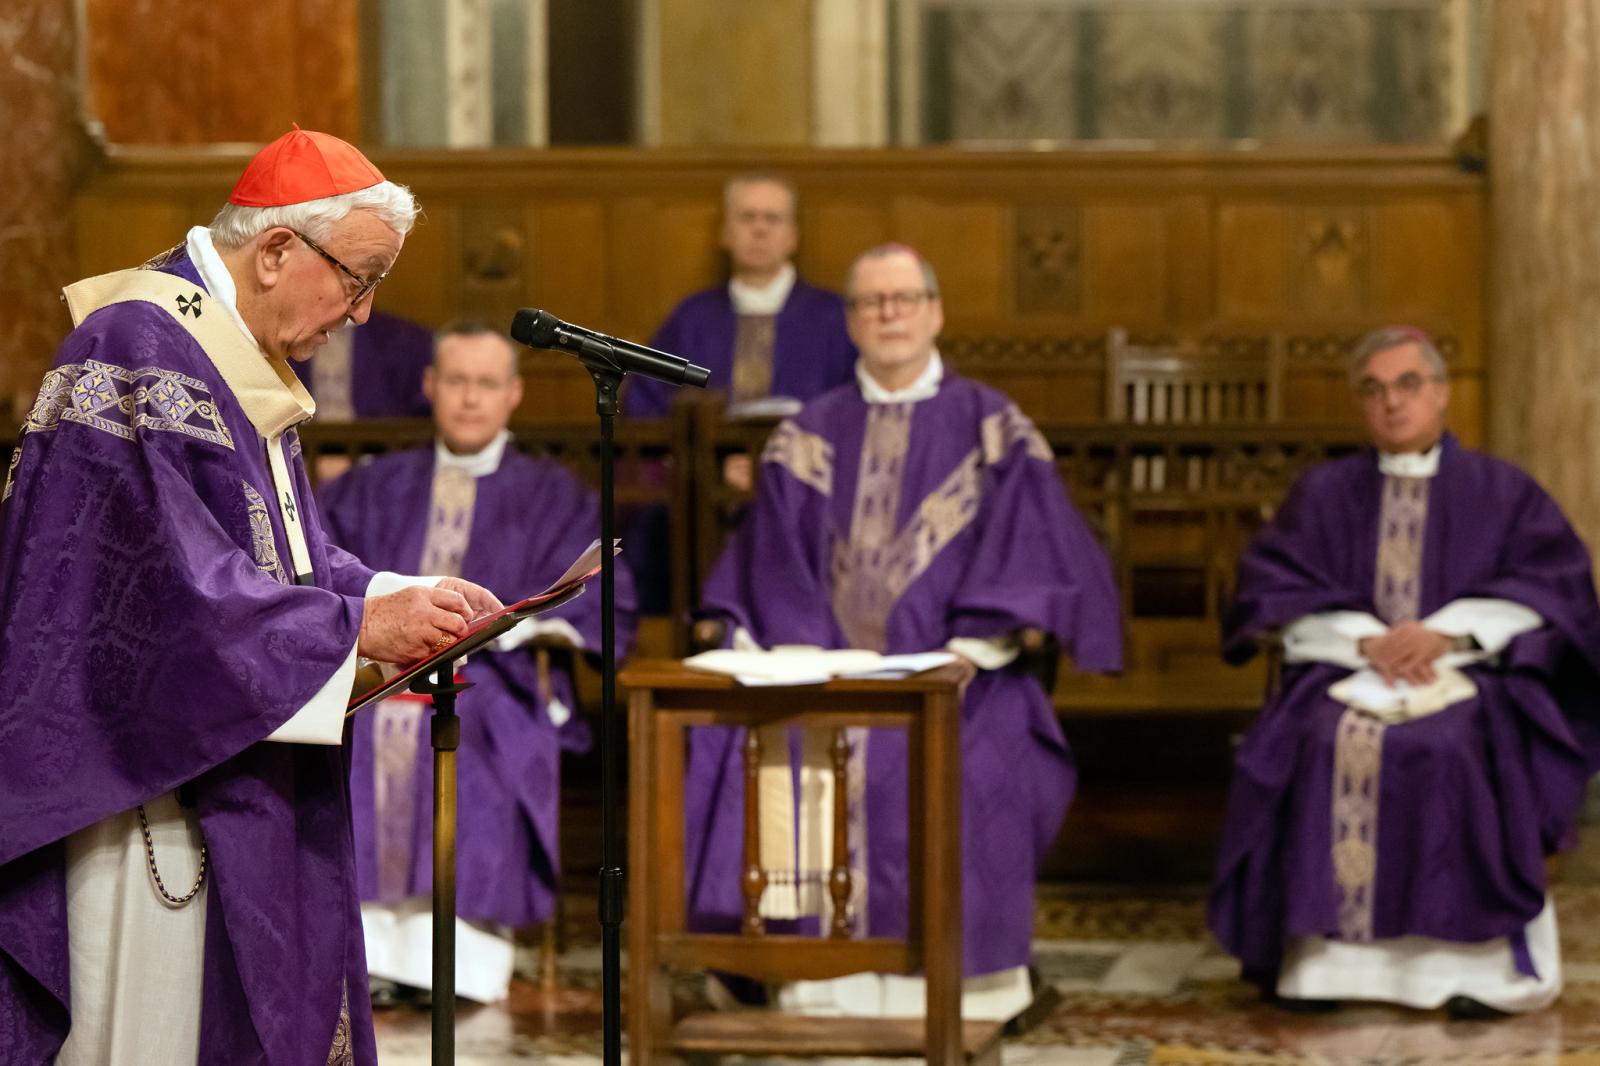 Mass of thanksgiving for ministry of Apostolic Nuncio - Diocese of Westminster